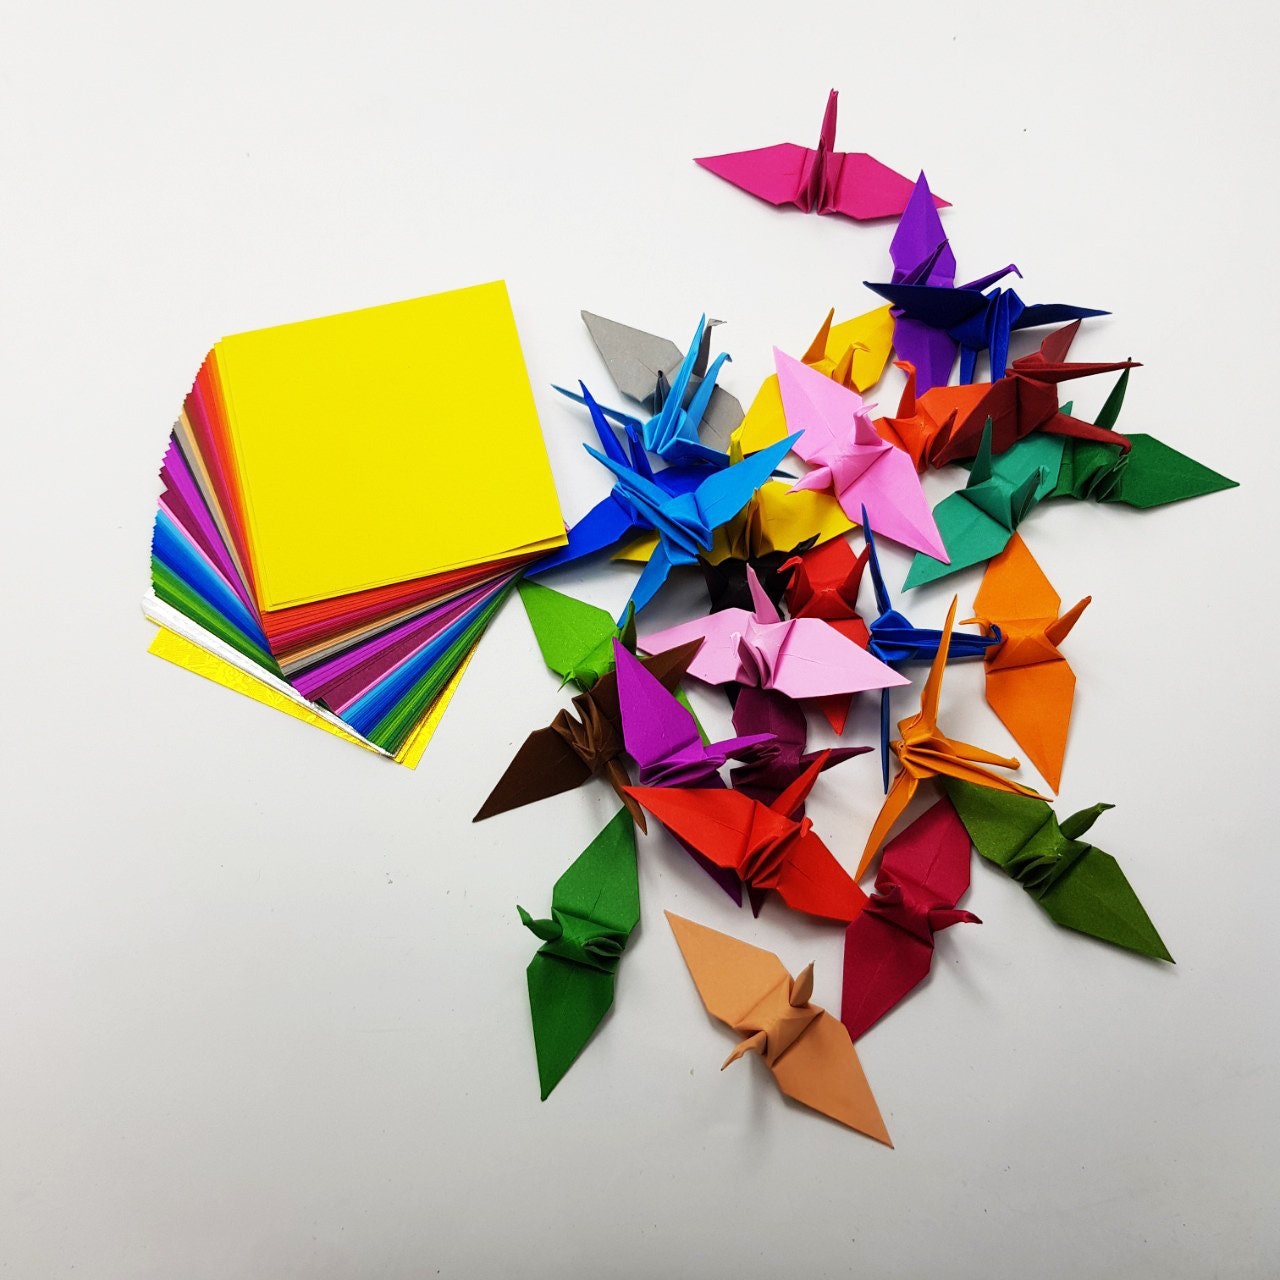 101 Origami Paper Sheets 31 Colors 3x3 inches Paper Pack for Paper Craft, Cranes, Flowers